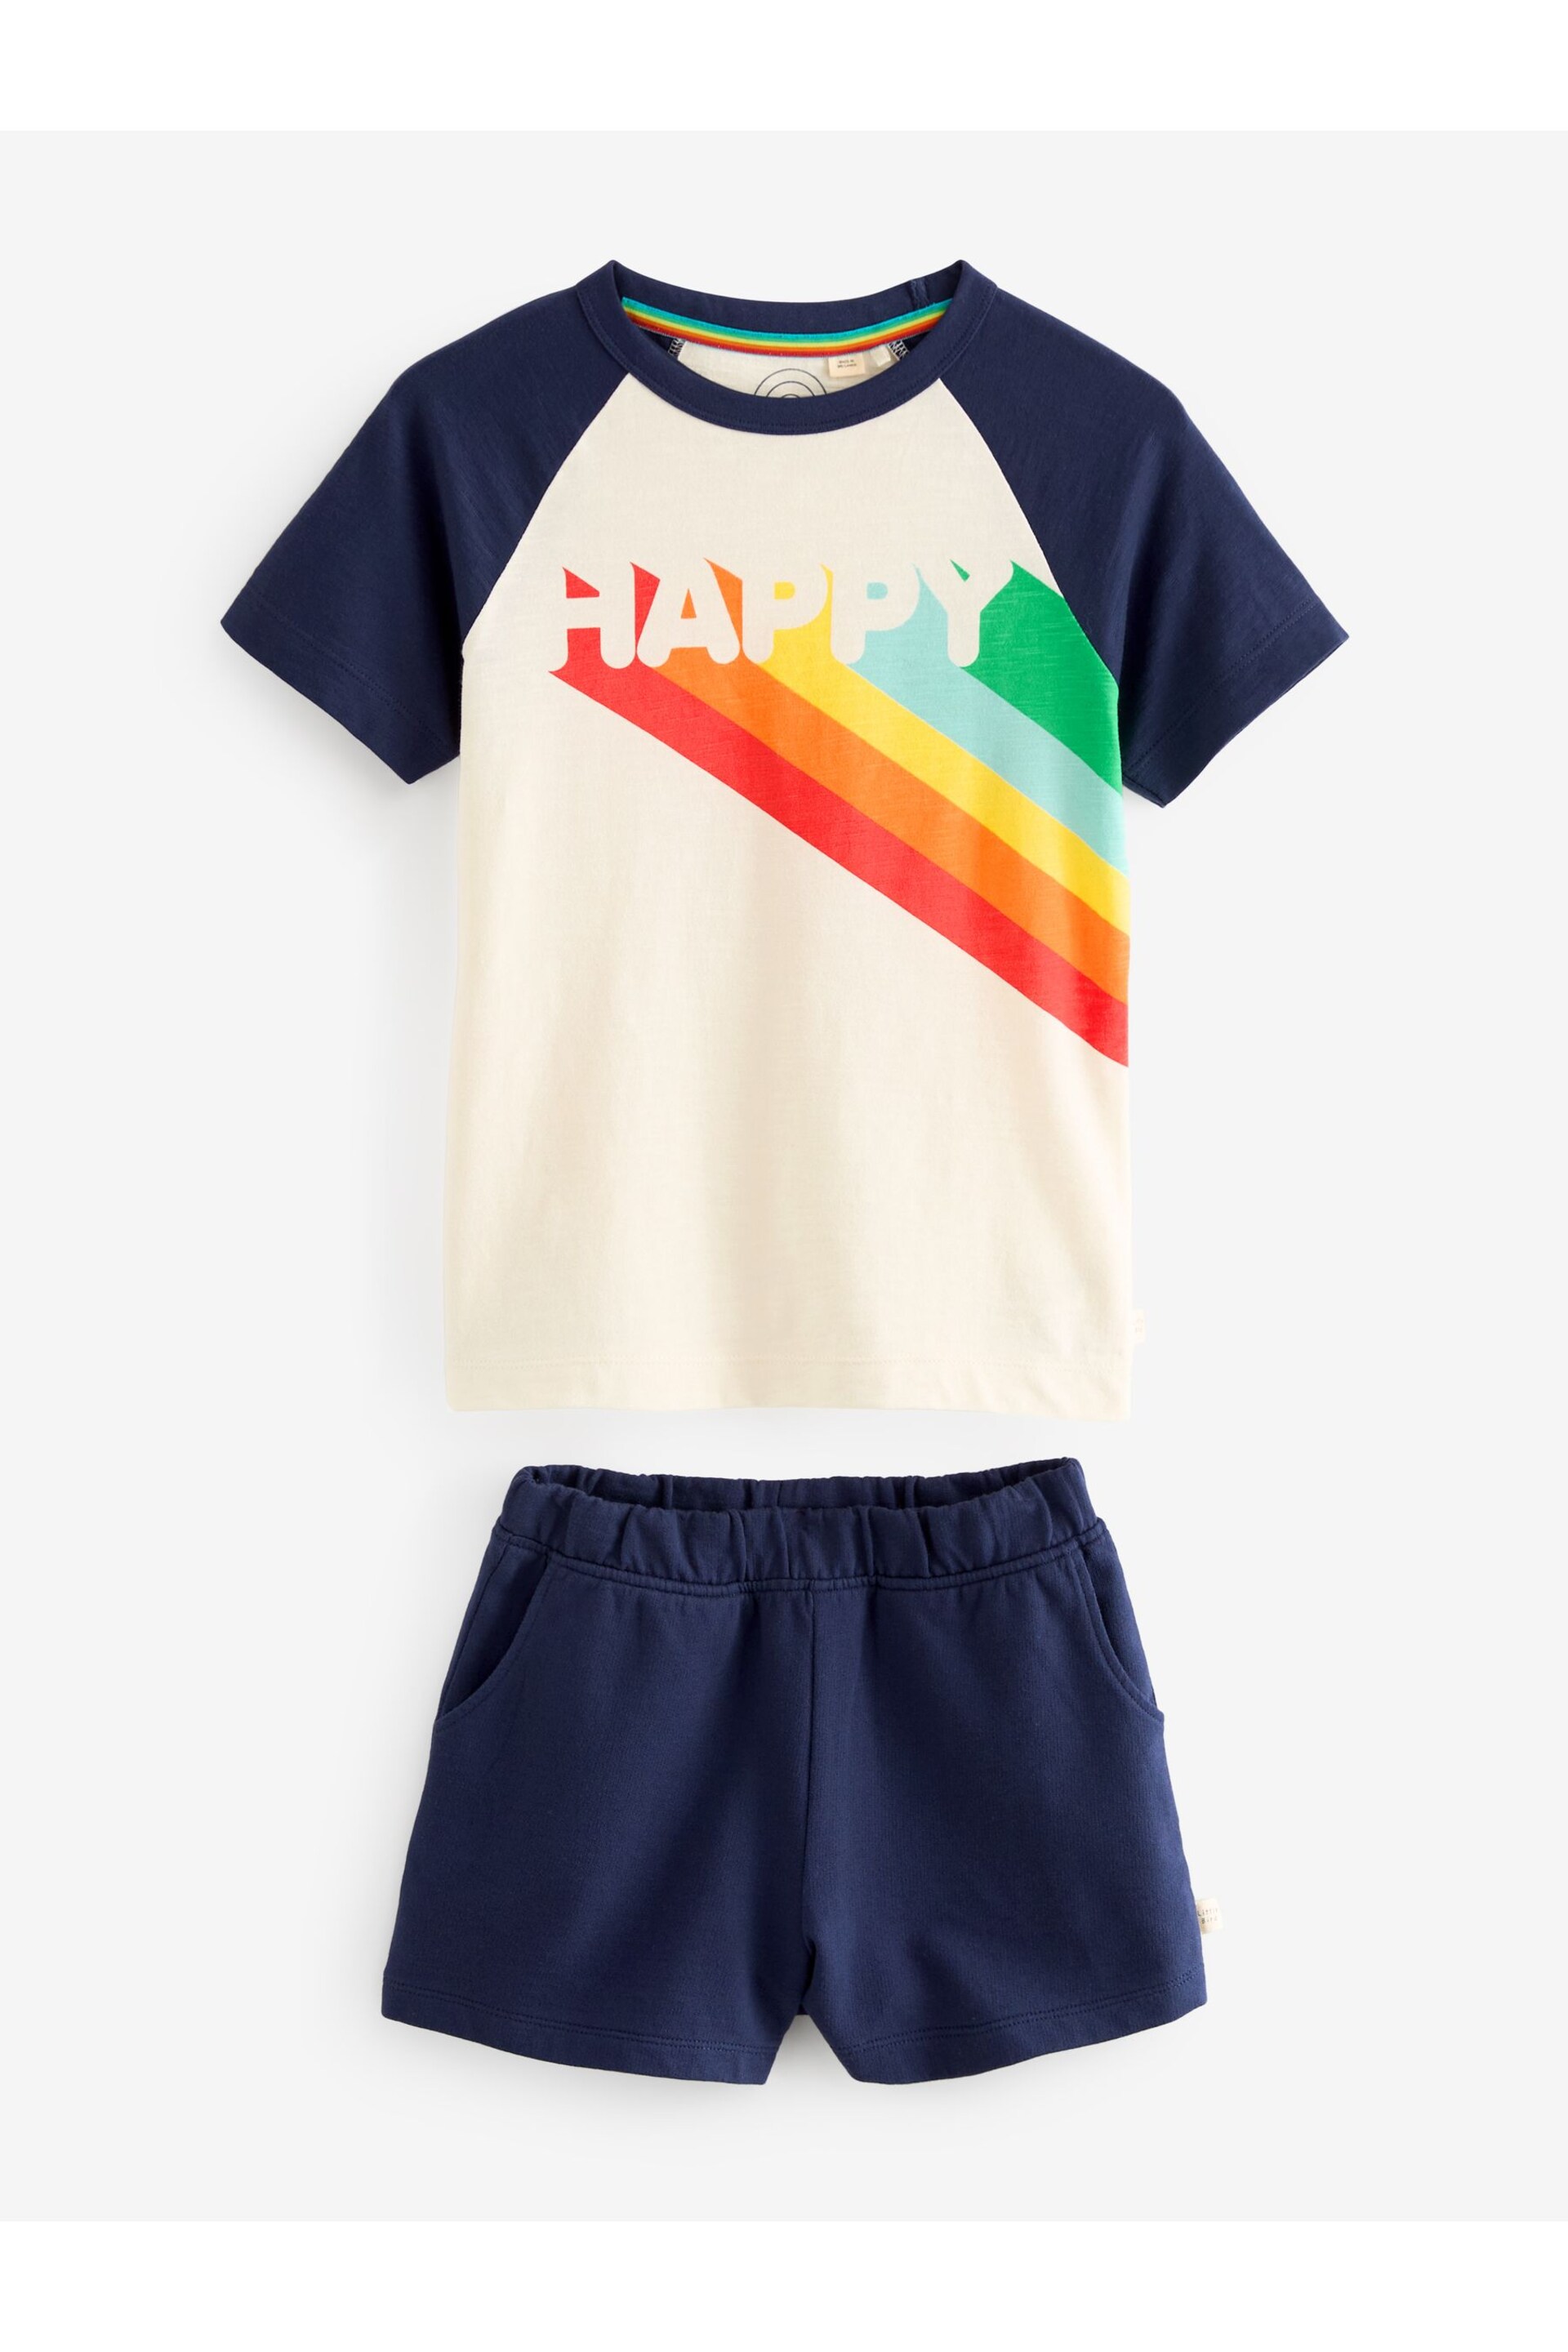 Little Bird by Jools Oliver Navy Happy T-Shirt and Short Set - Image 4 of 6